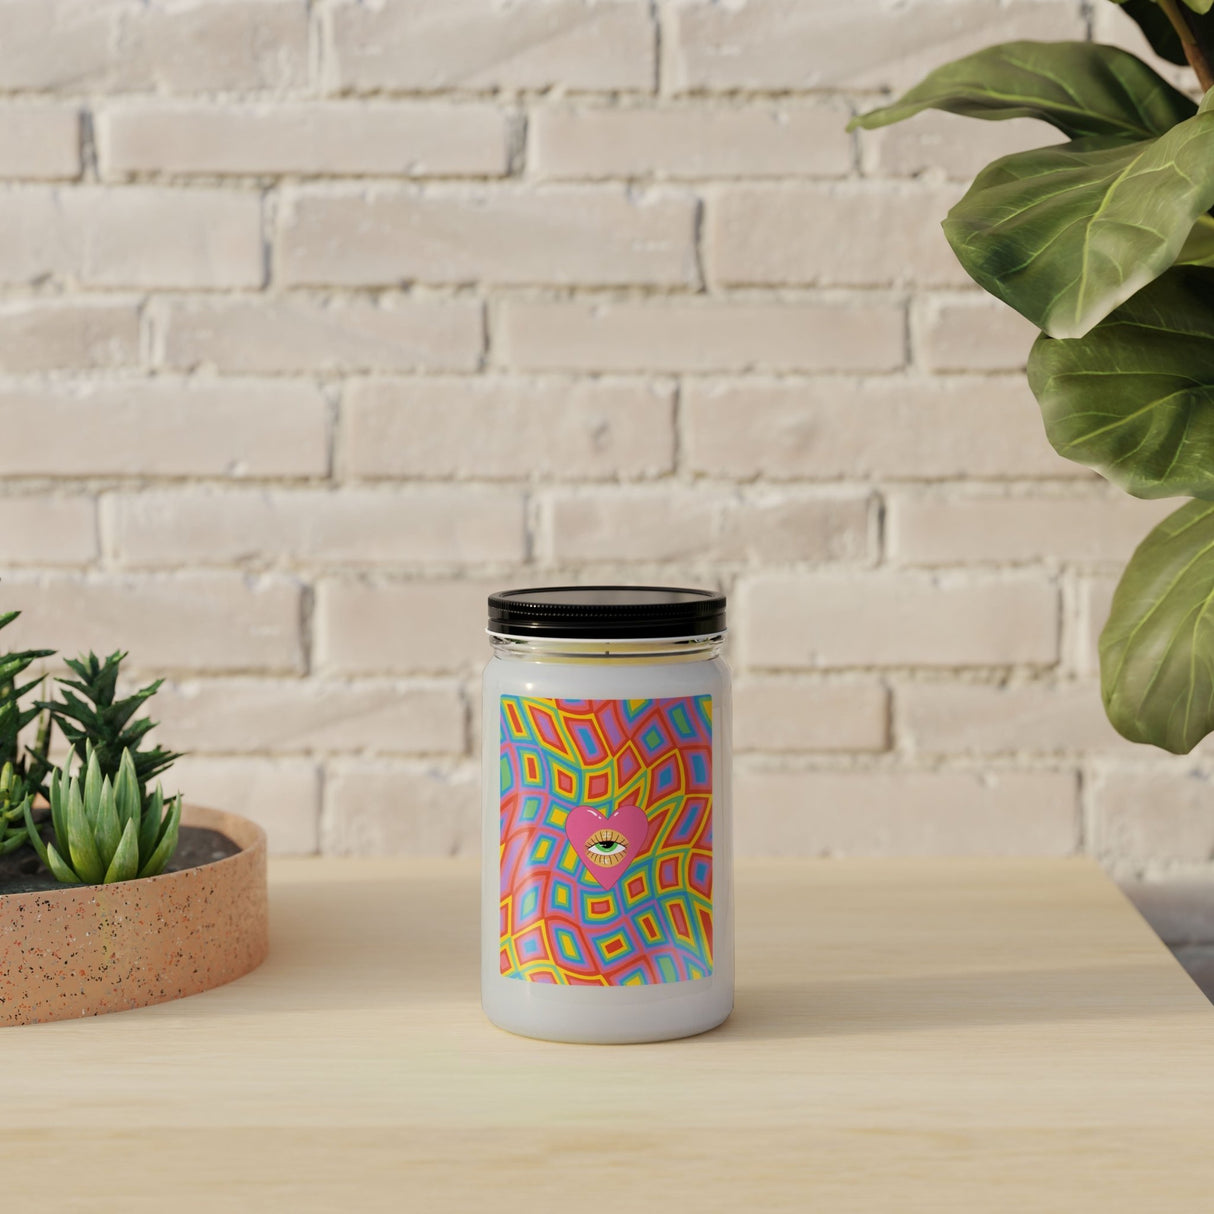 Vivillus Scented Candle in Mason Jar: Wavy Love - Candlefy